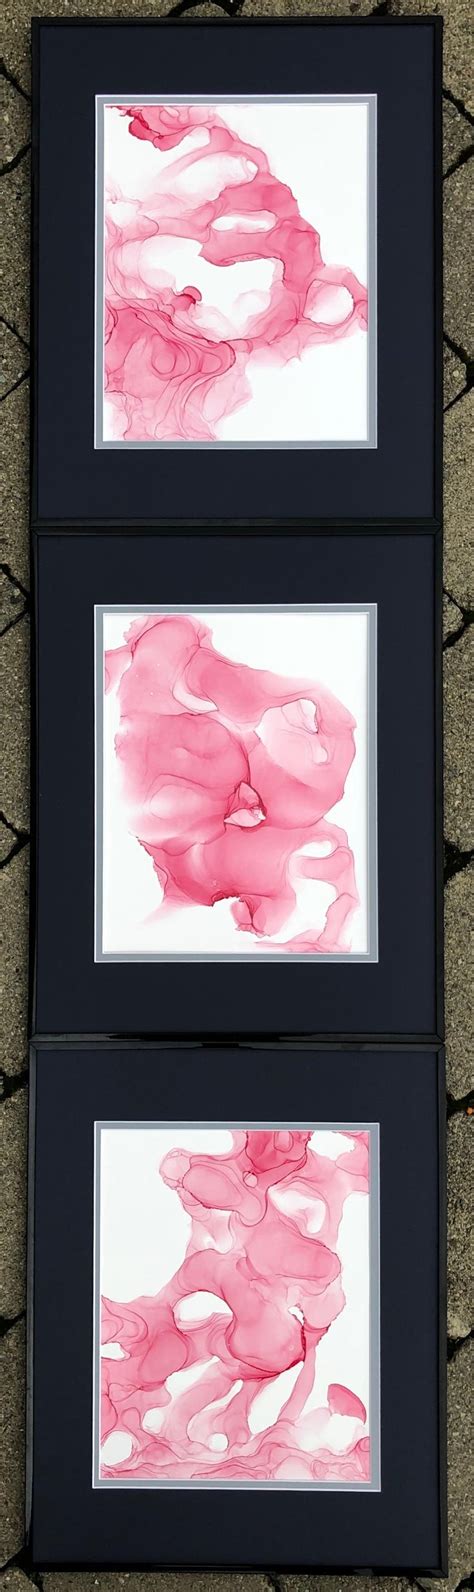 Mila Akopova Wild Orchid Ii Abstraction Art Made In Pale Pink Rose